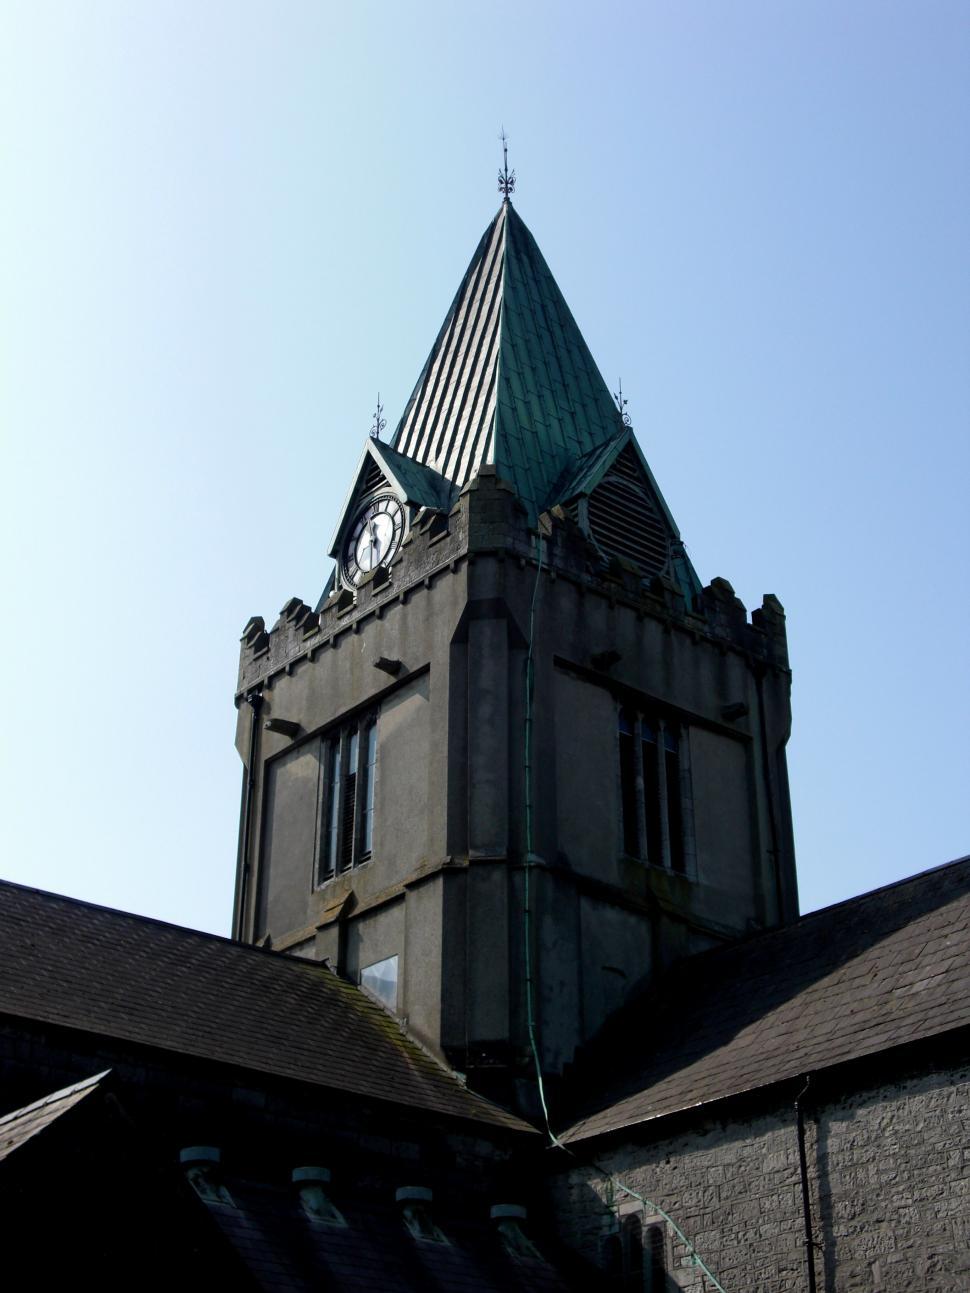 Free Image of Ireland - Galway Church Tower 